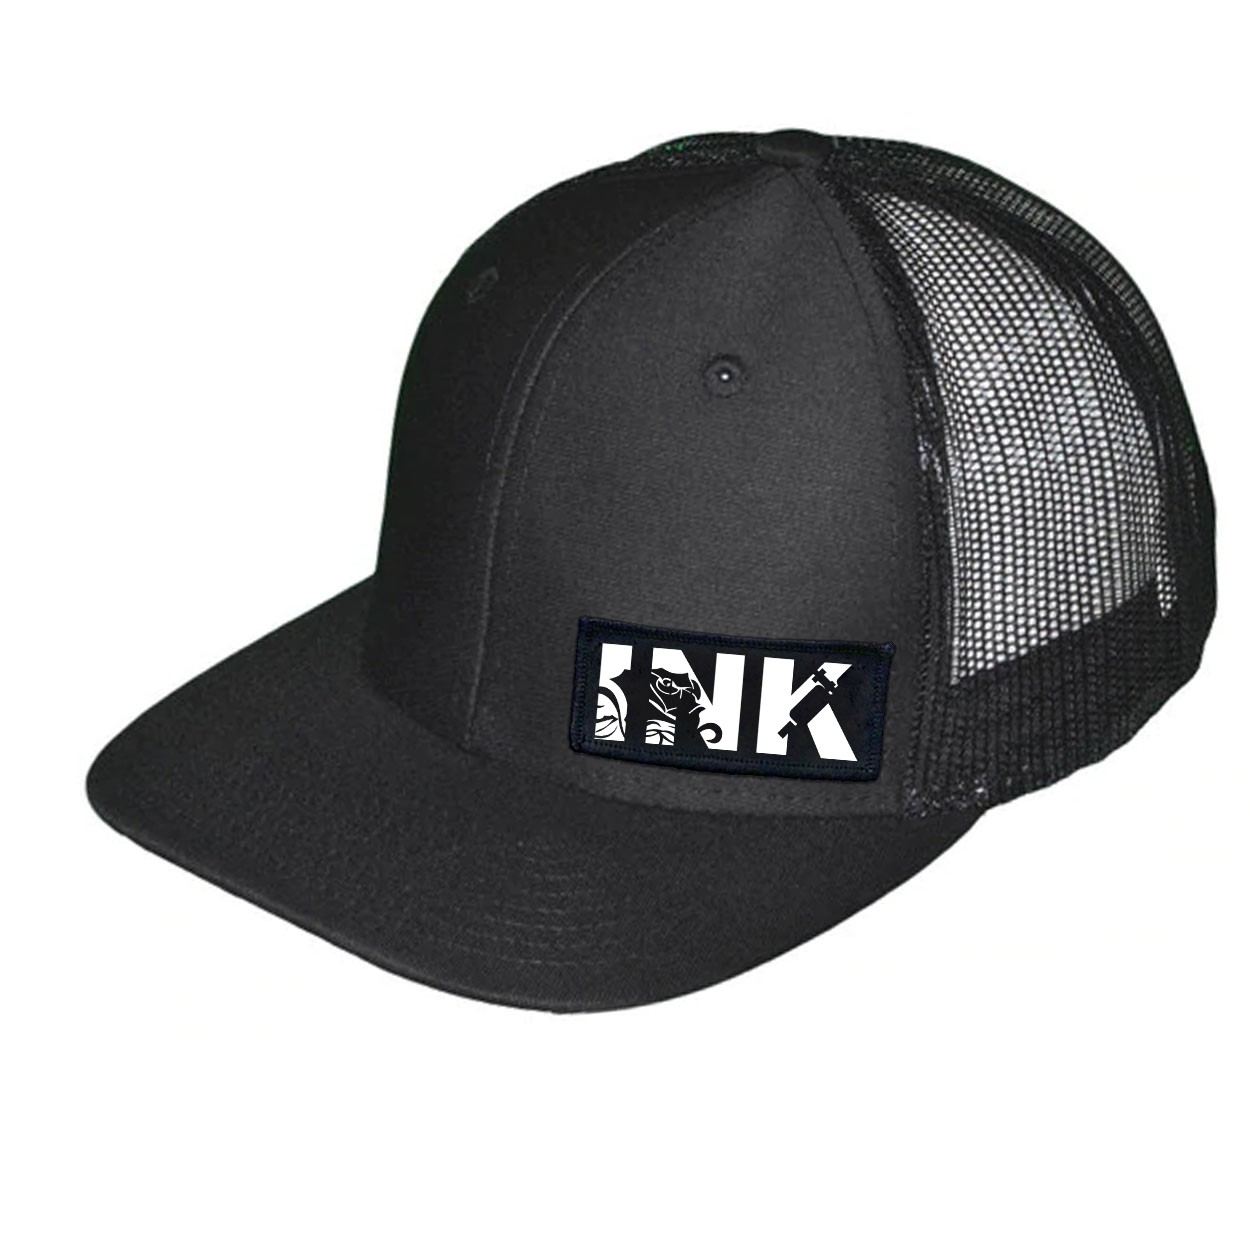 Ink Tattoo Logo Night Out Woven Patch Snapback Trucker Hat Black